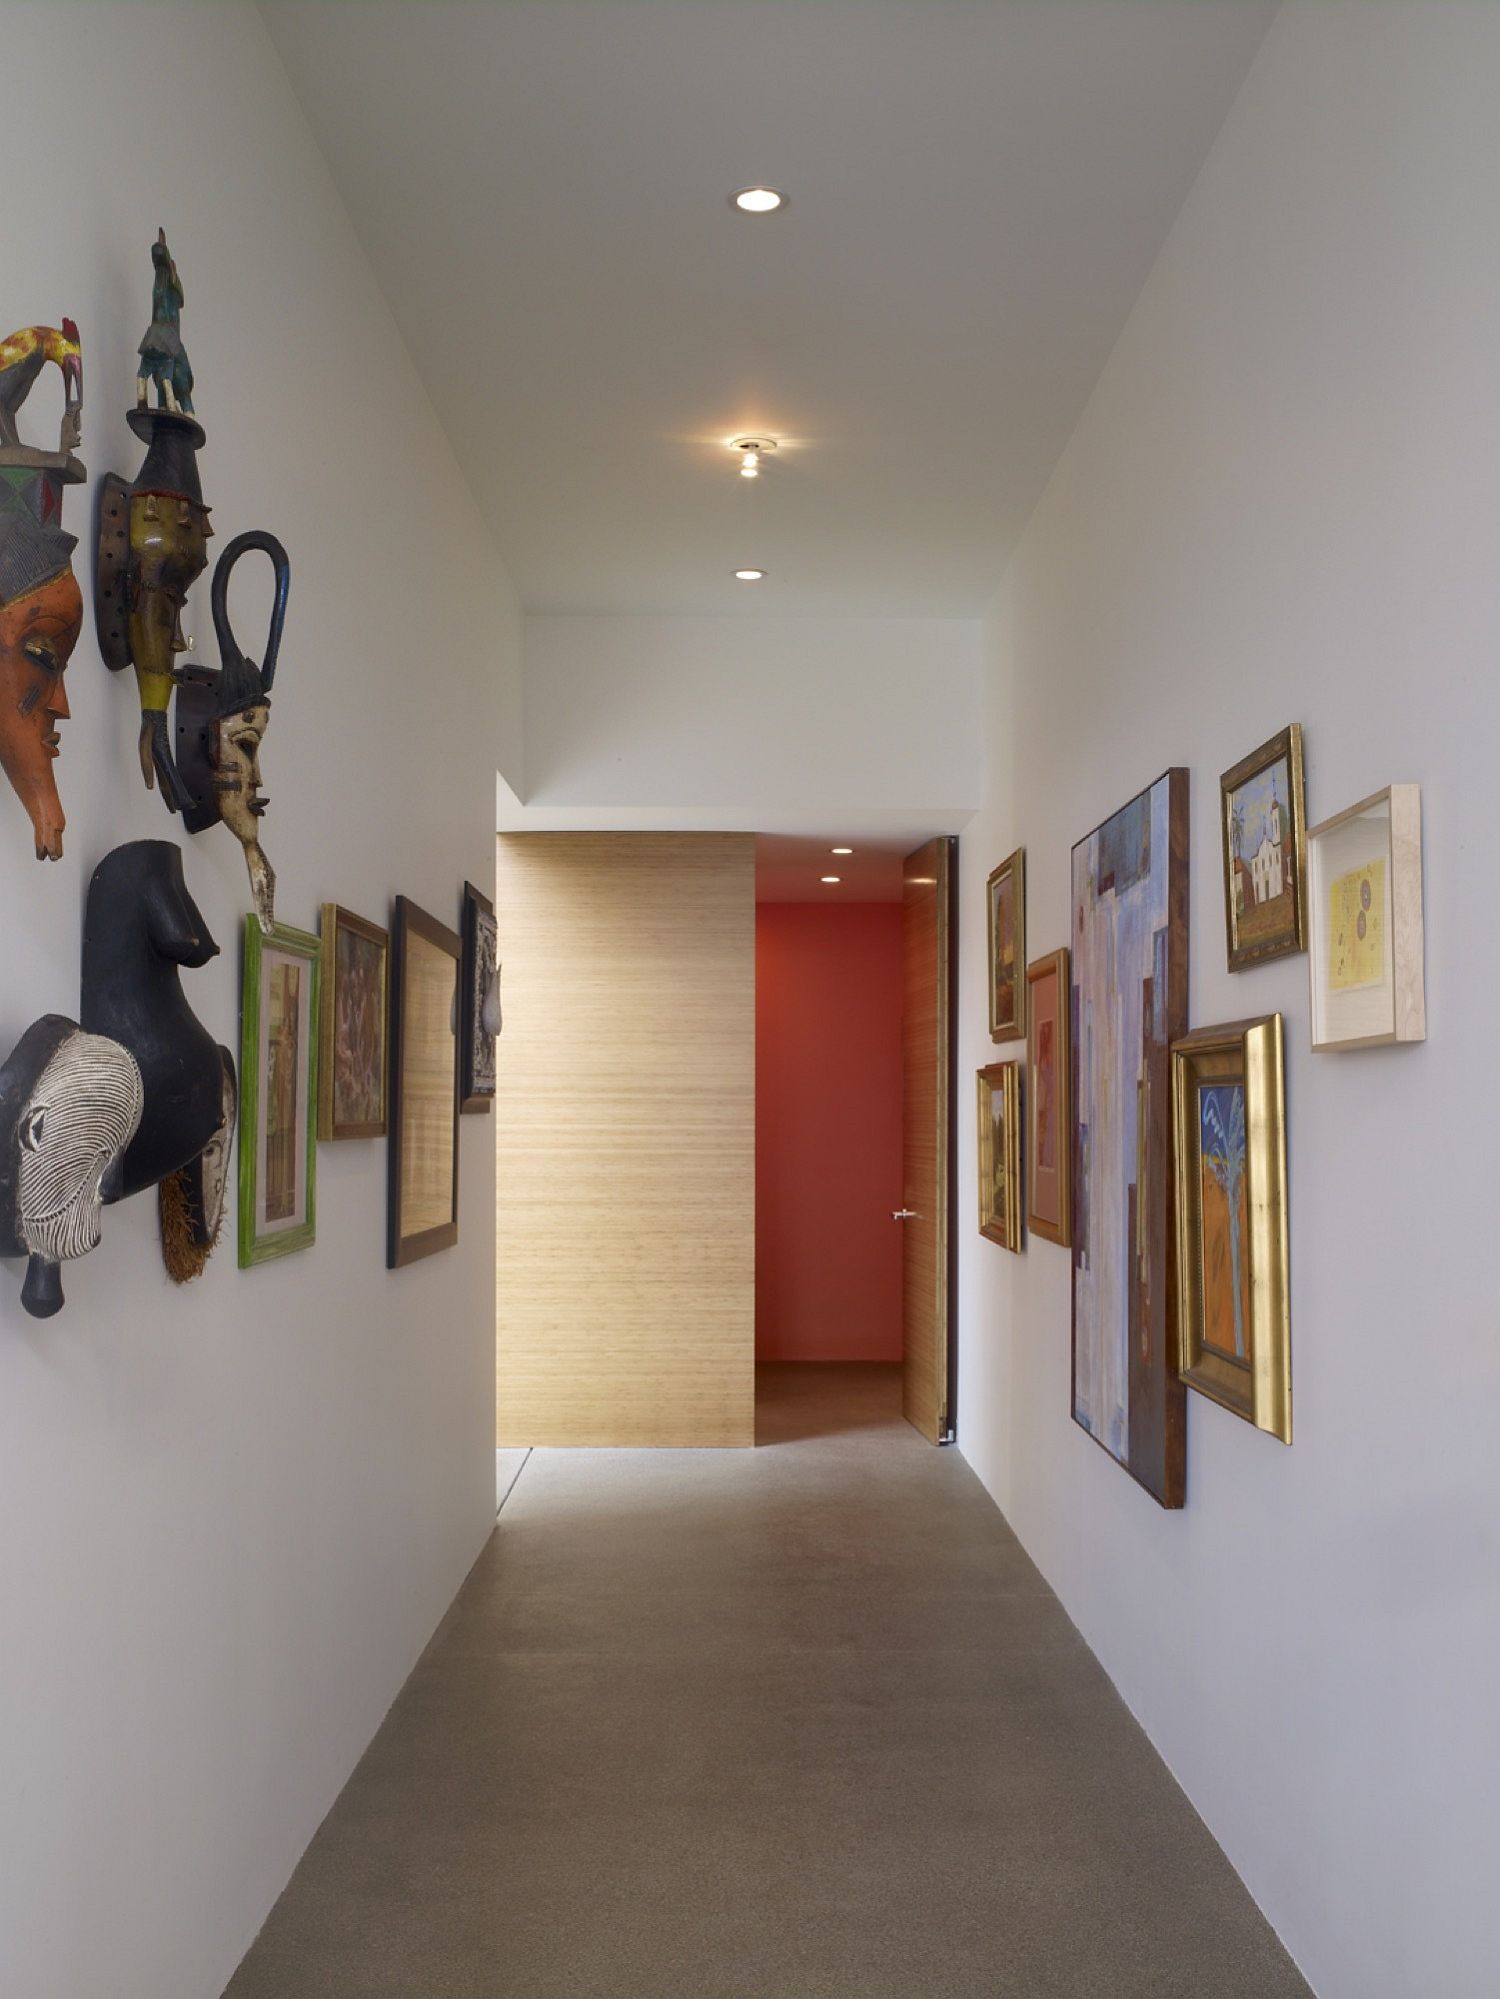 Corridor-turned-into-an-art-gallery-style-setting-using-unique-art-pieces